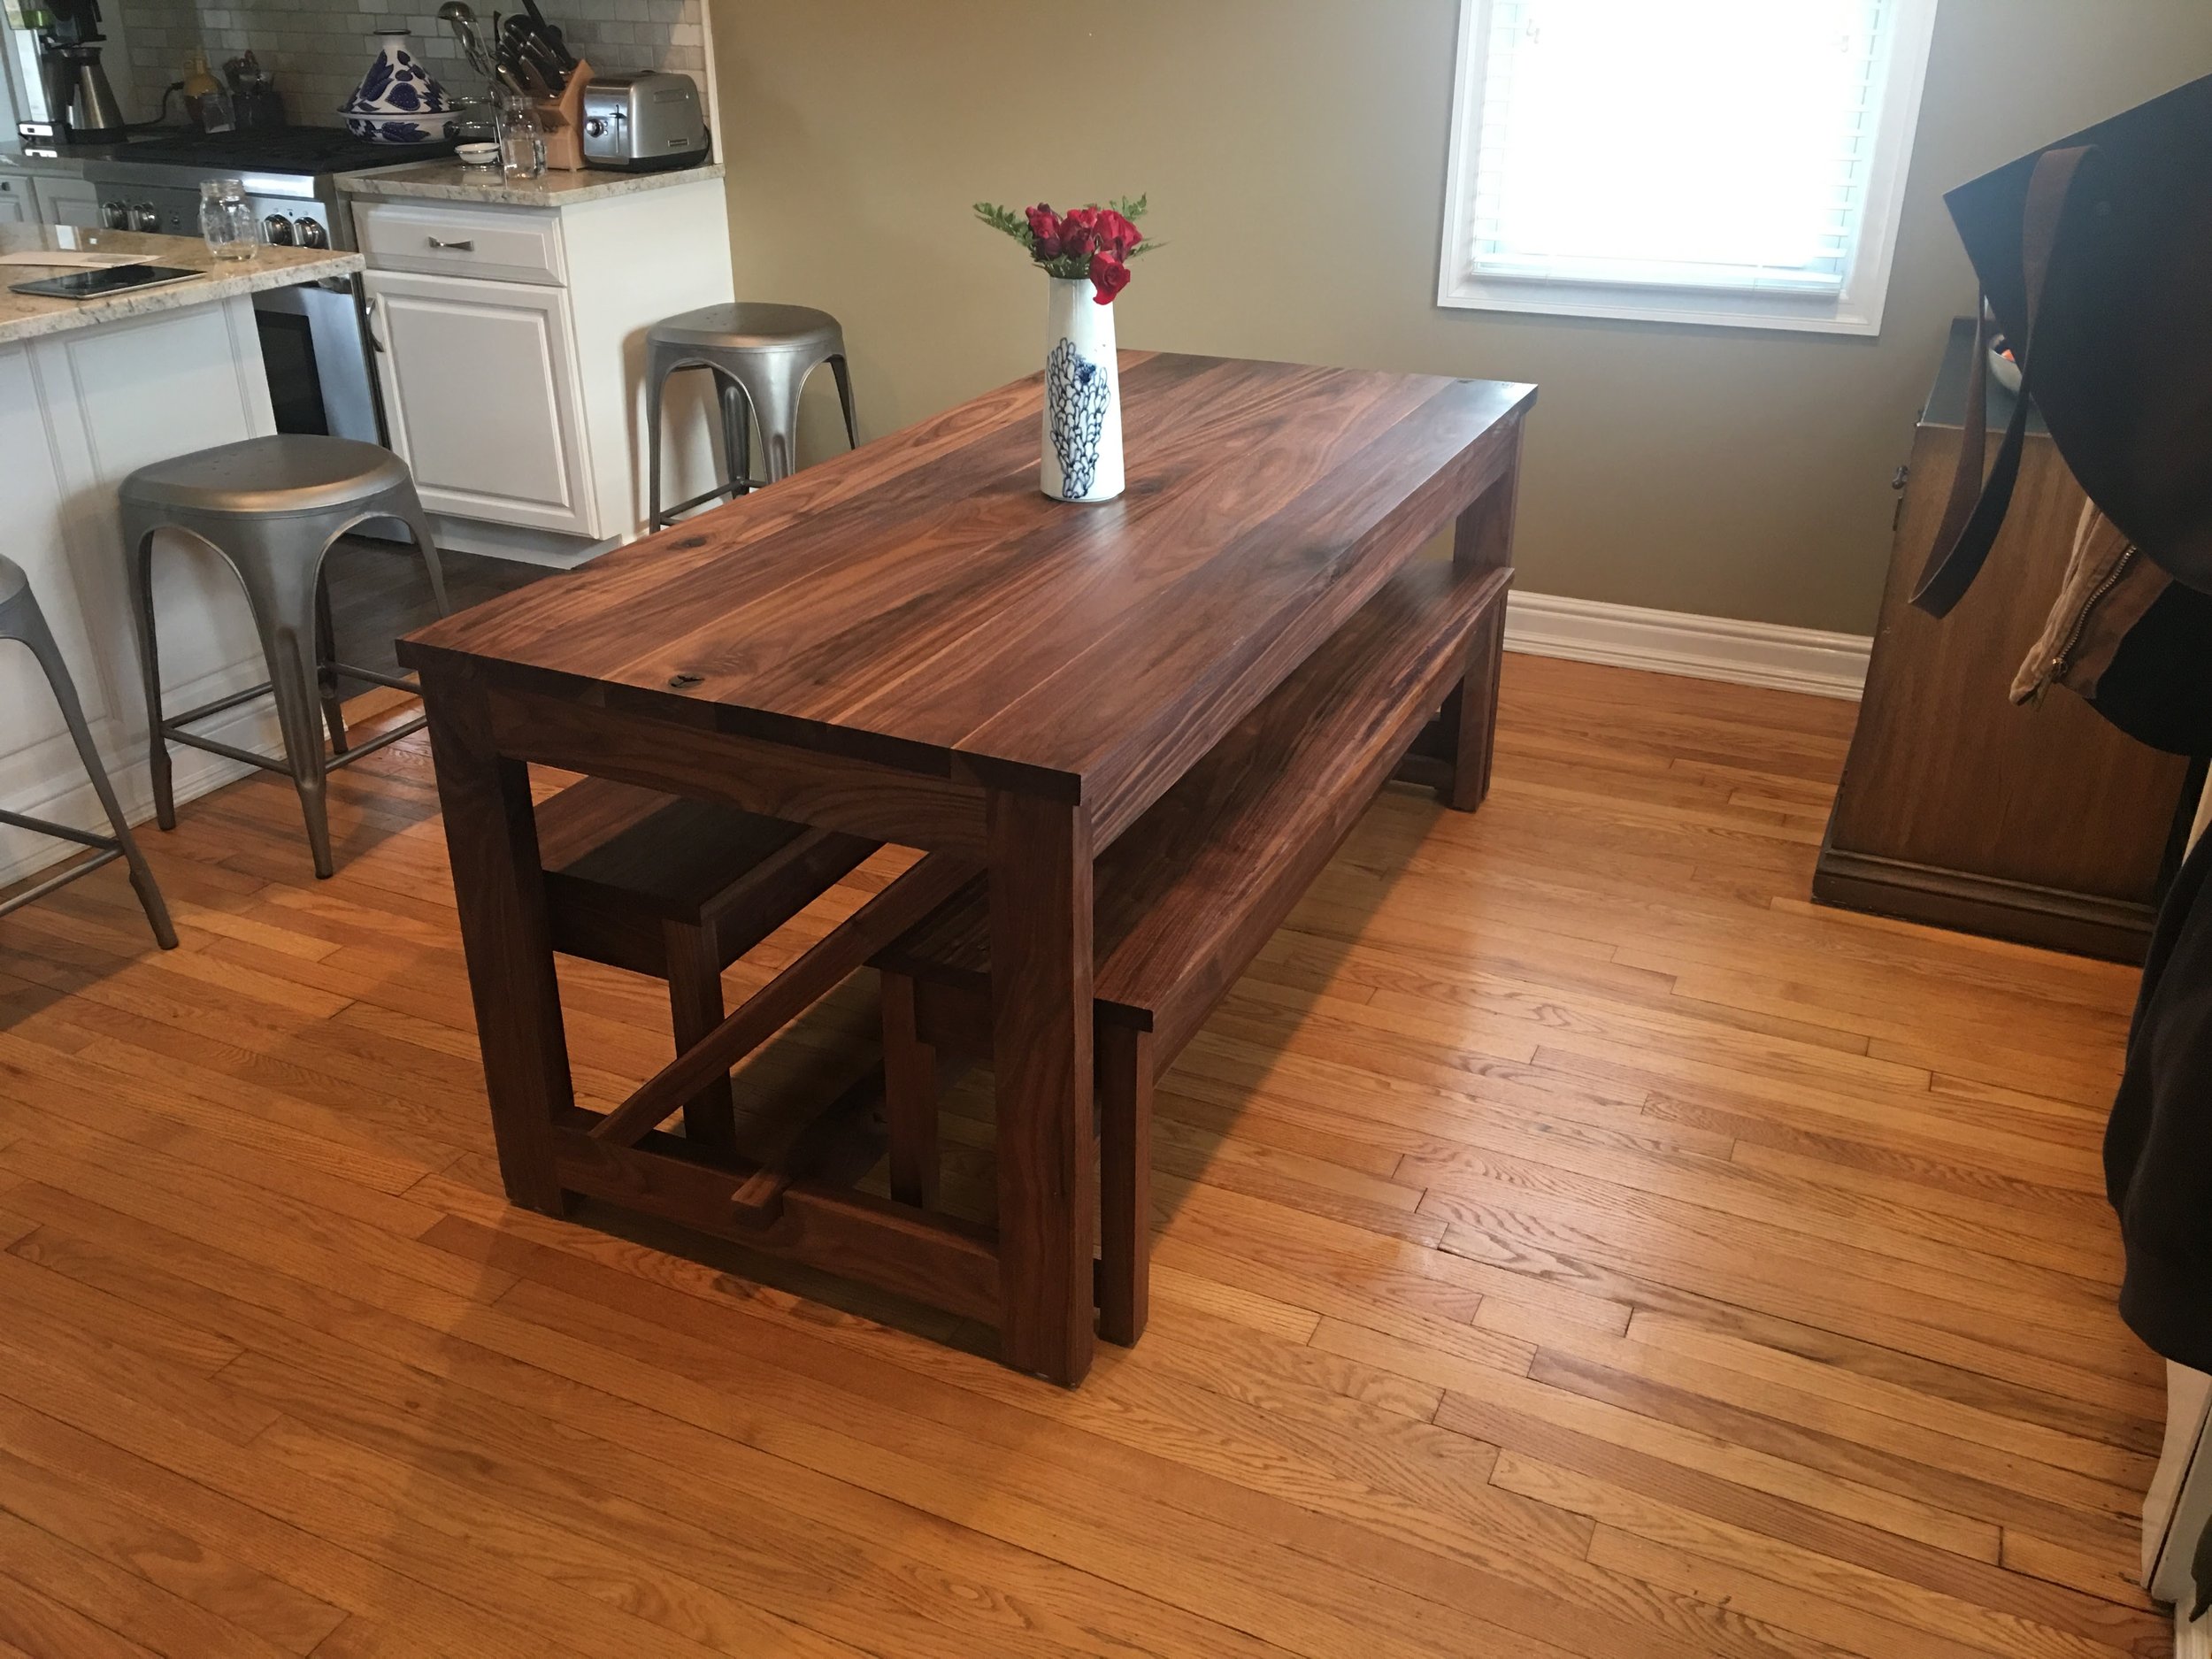 Wooden kitchen table and bench